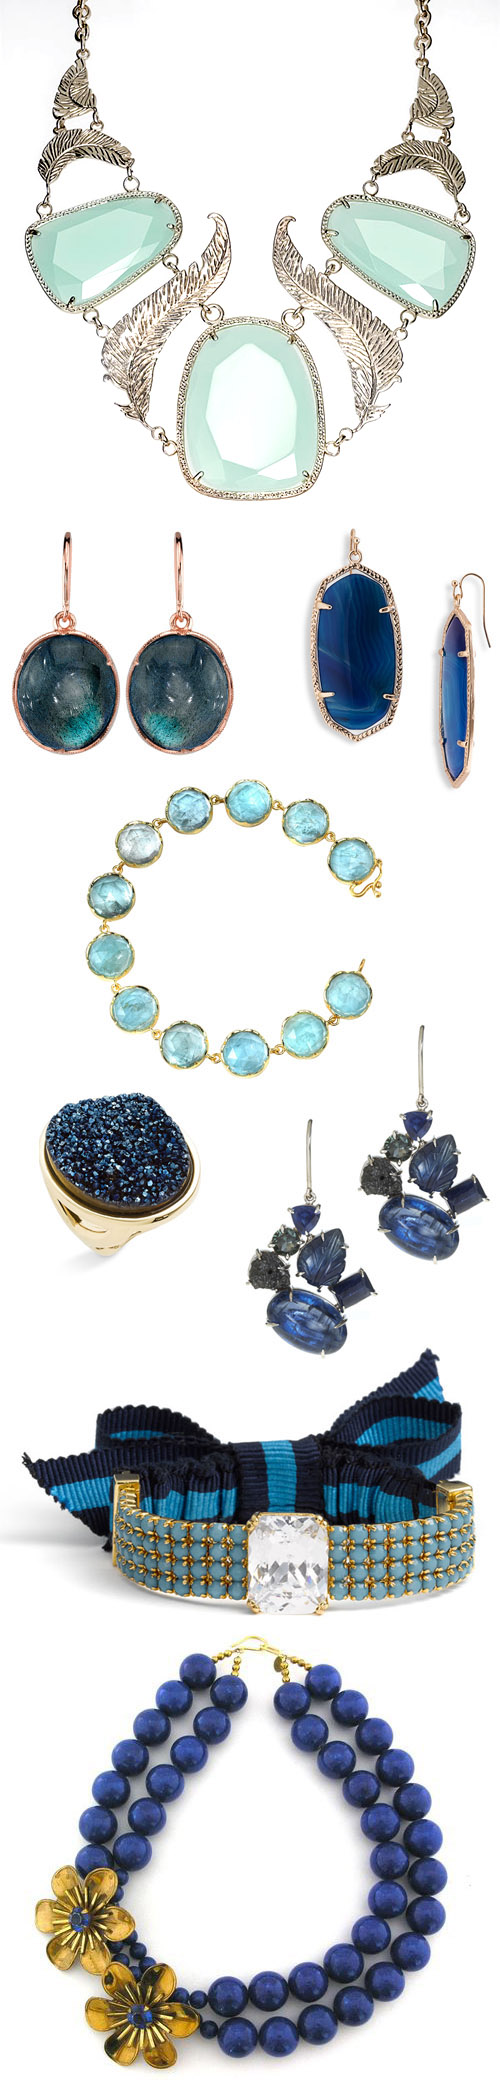 something blue wedding jewelry and accessories